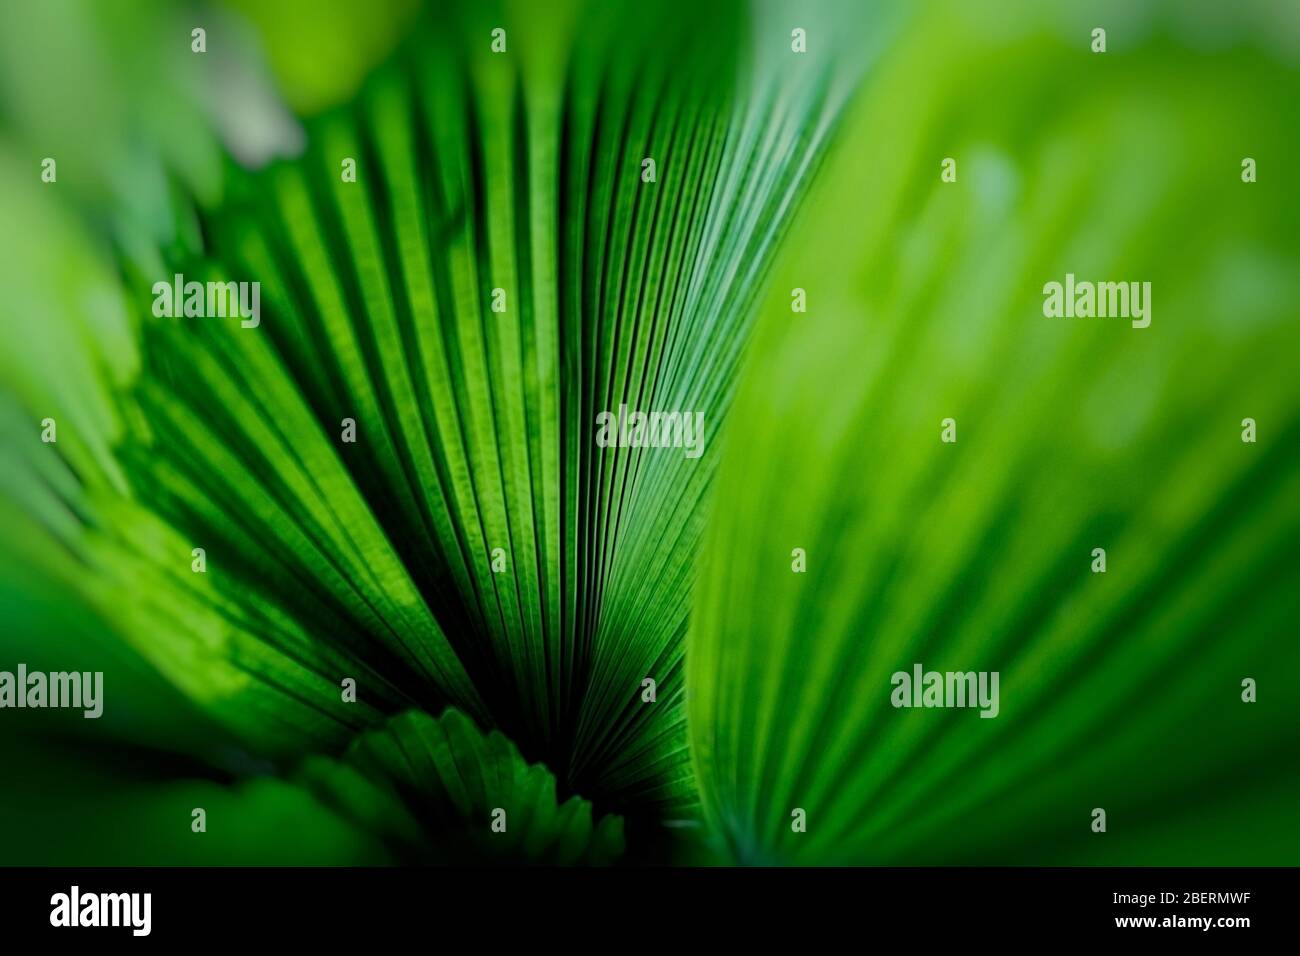 detail of palm trees, cuba Stock Photo